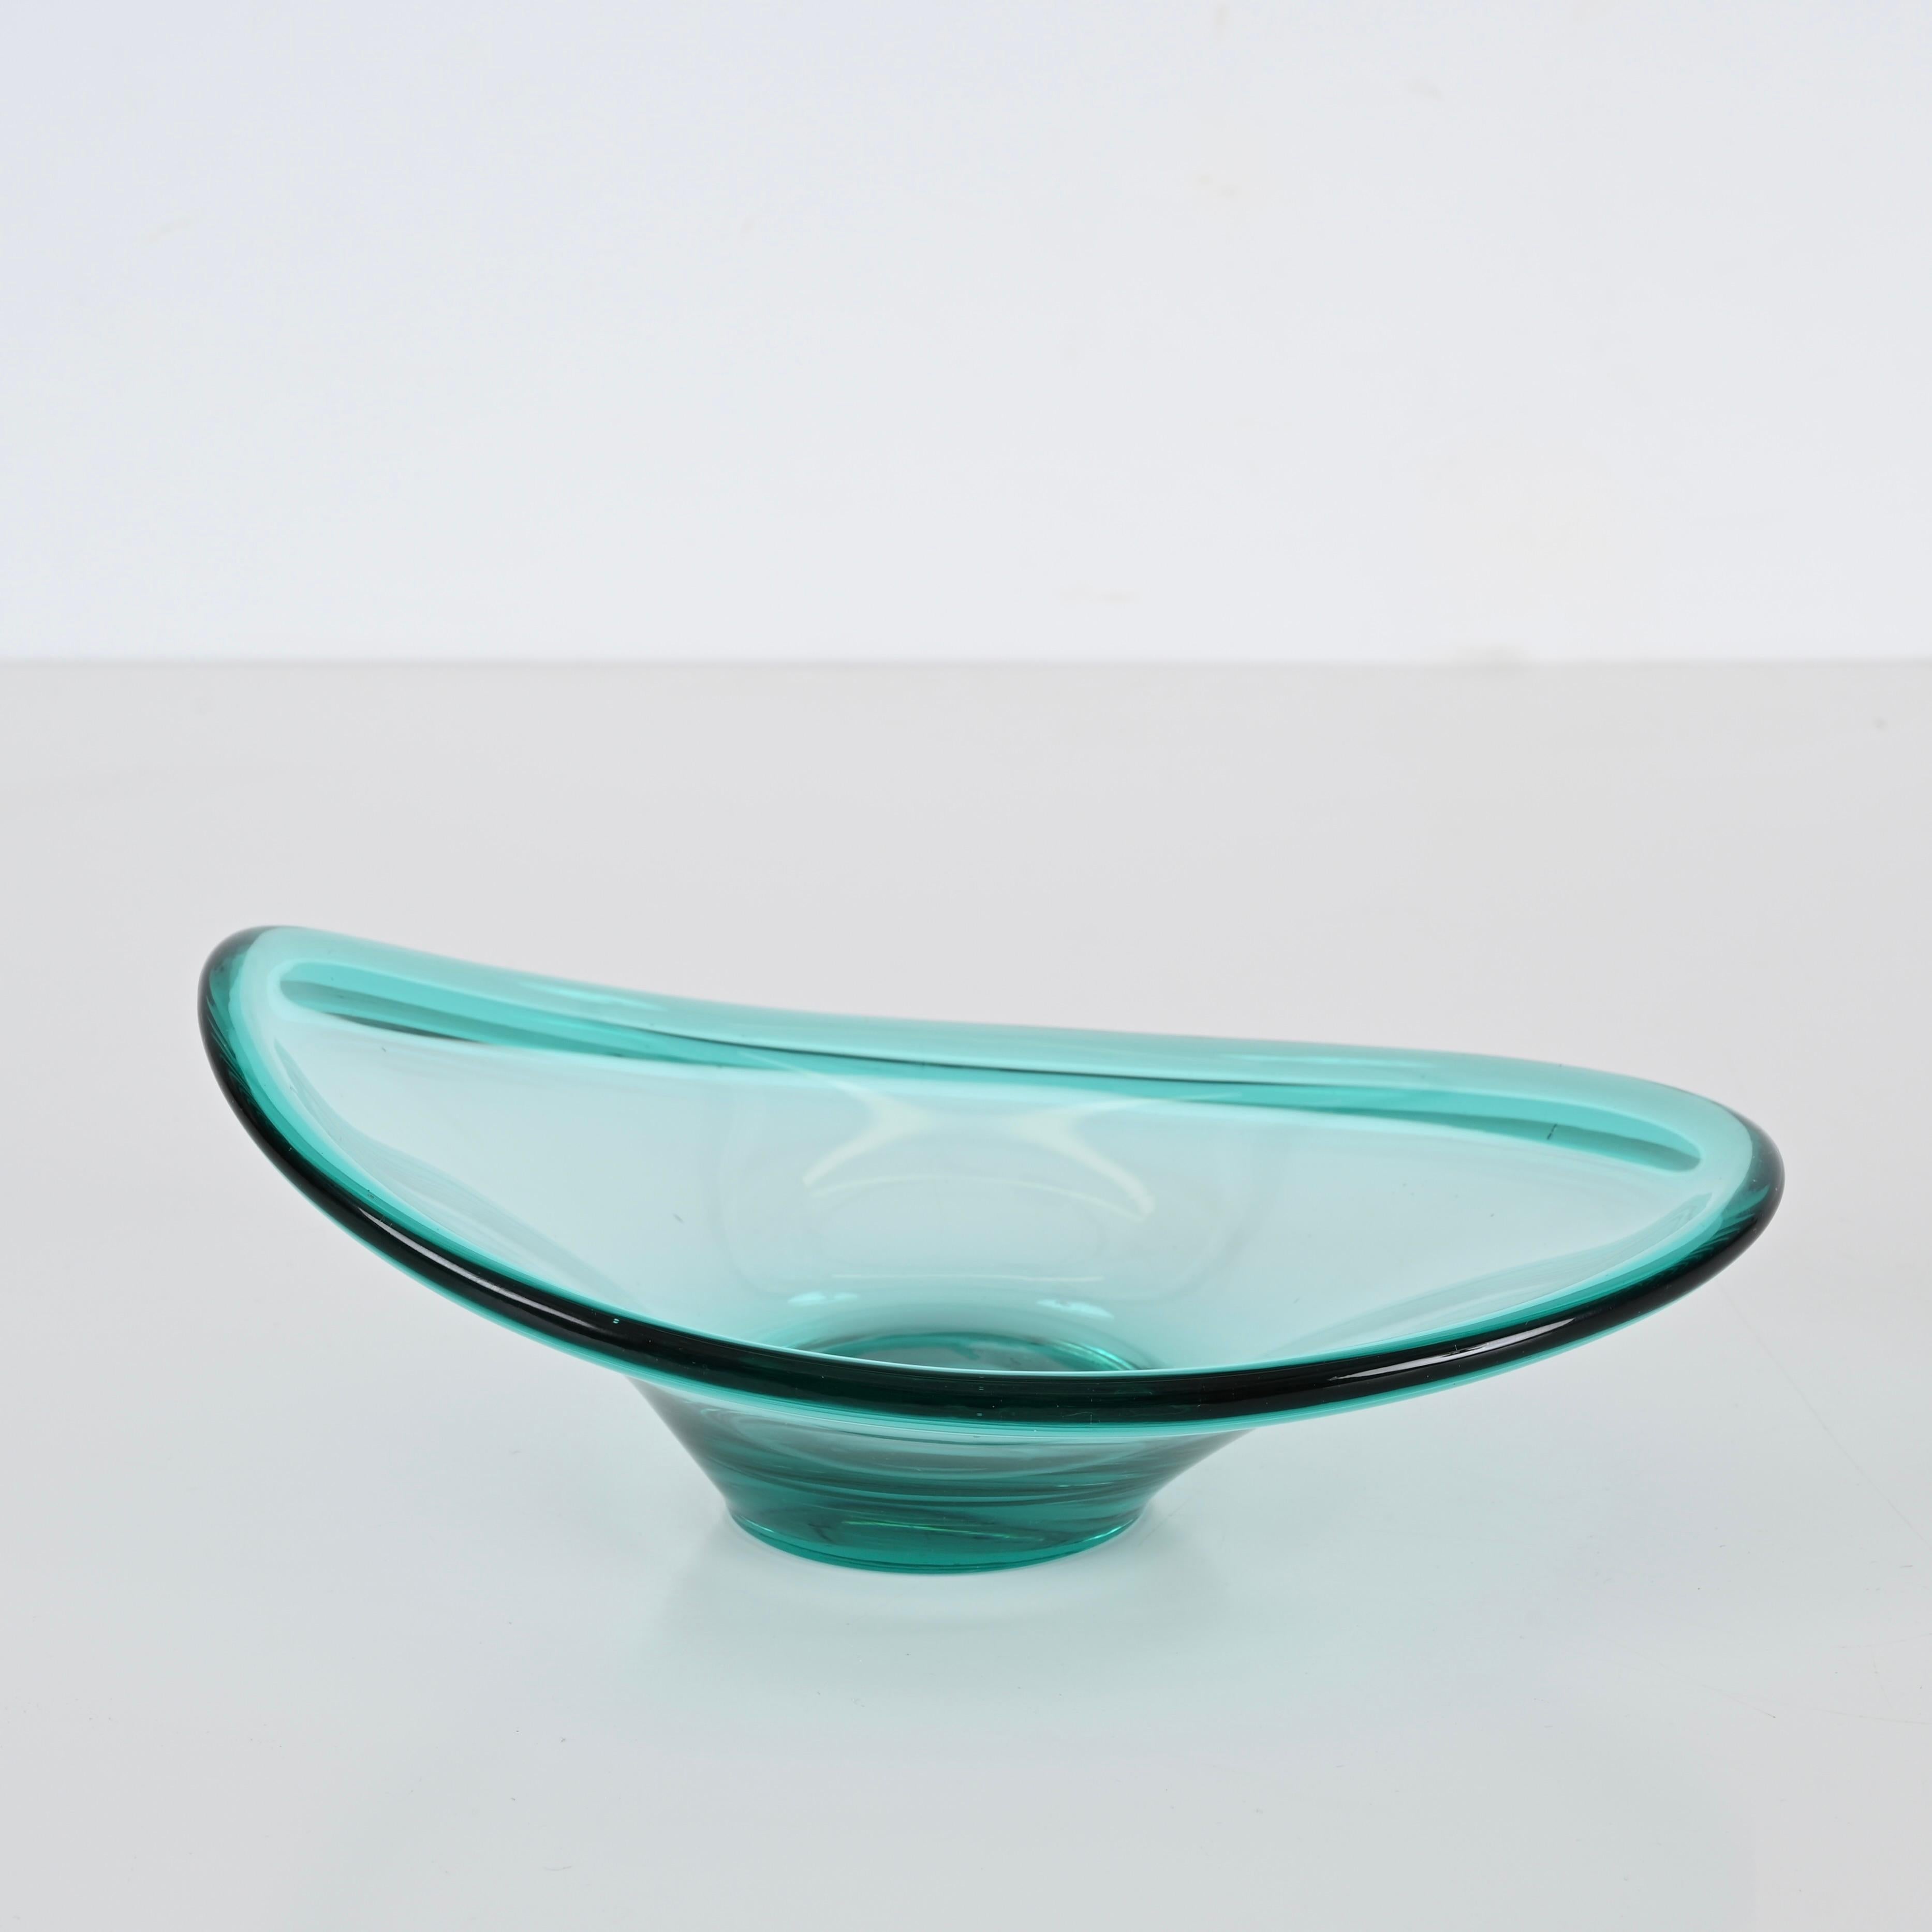 Mid-Century Modern Tiffany Blue Murano Glass Bowl or Pocket Emptier, Italy, 1960s For Sale